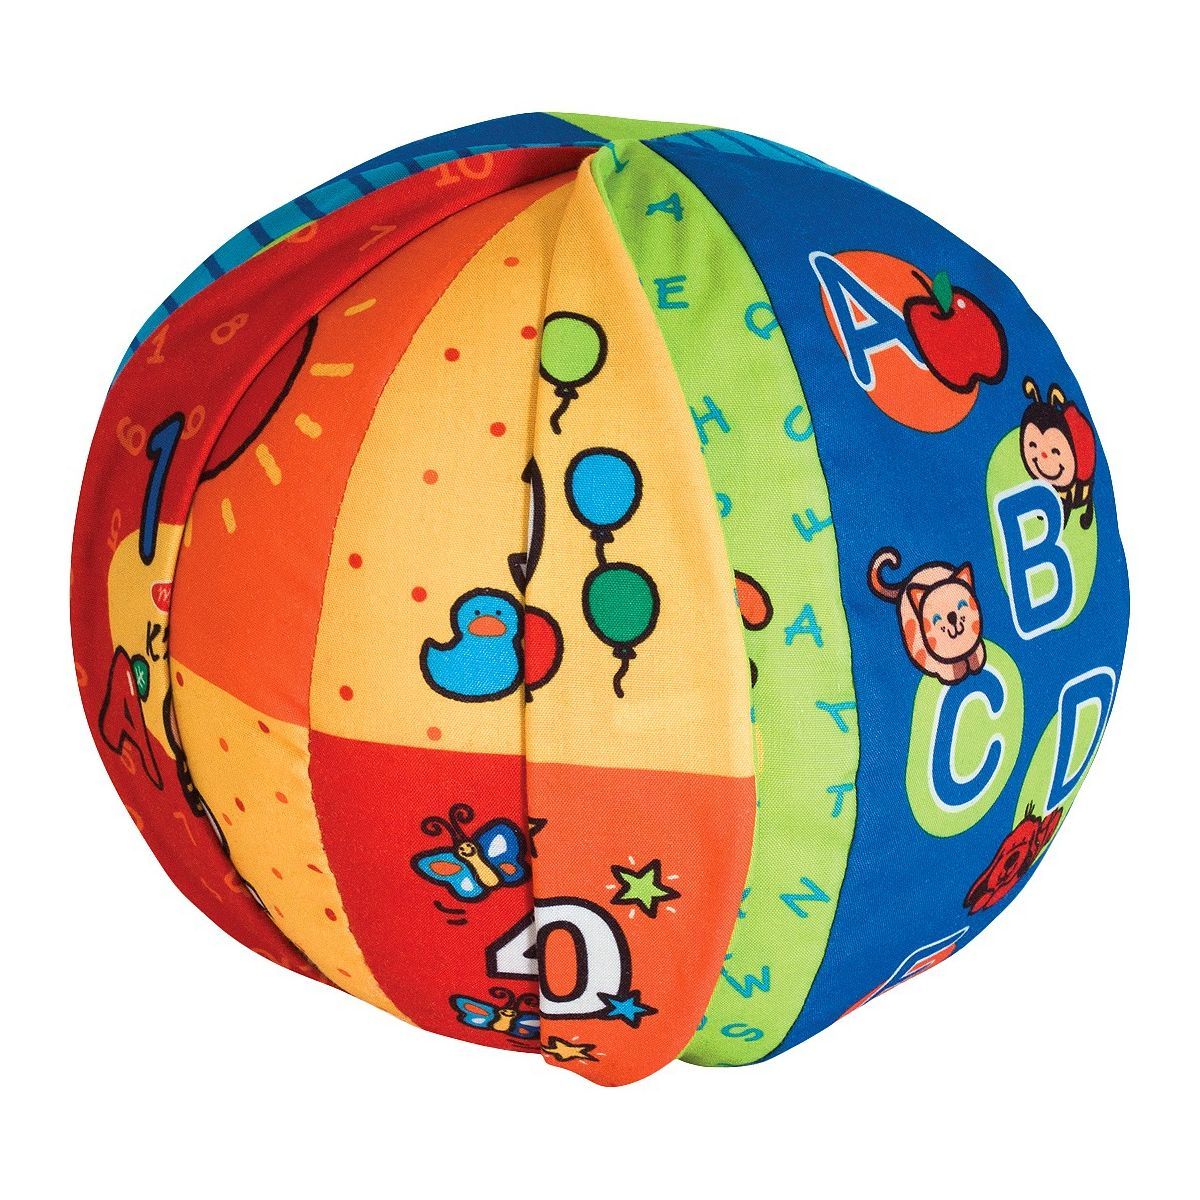 Melissa & Doug K's Kids 2-in-1 Talking Ball Educational Toy - ABCs and Counting 1-10 | Target